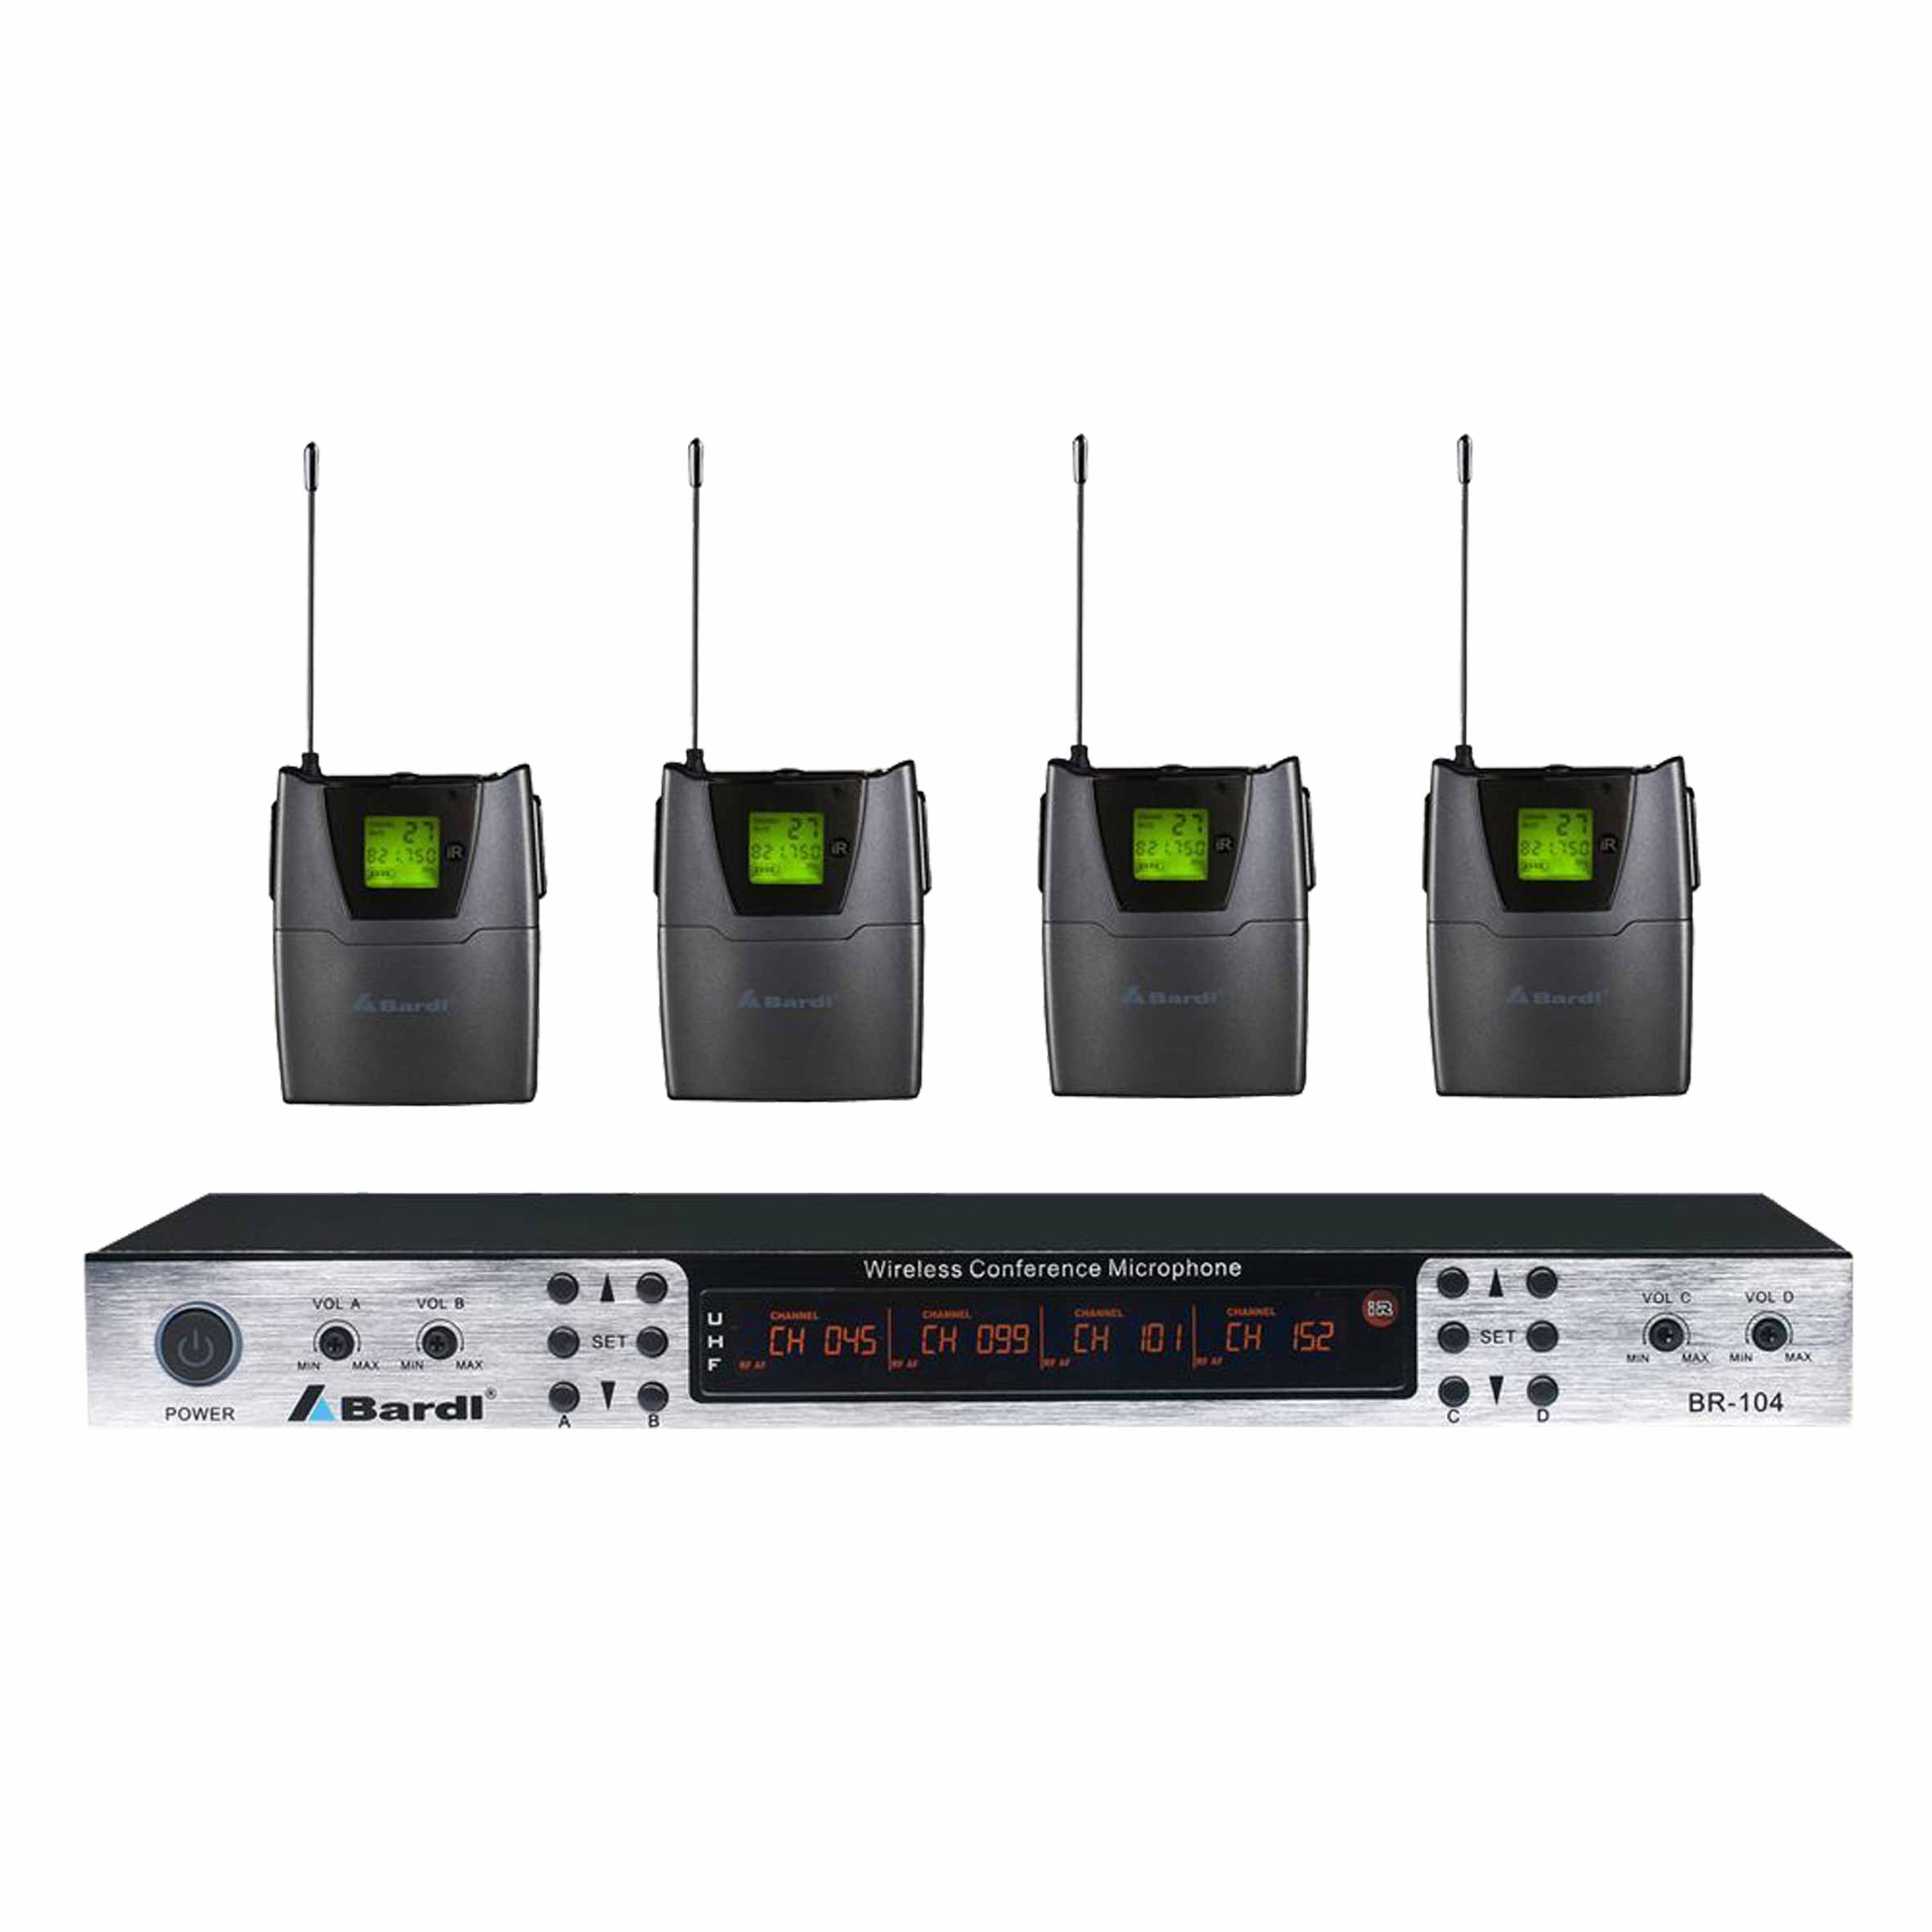 Bardl four channels wireless conference BR-104